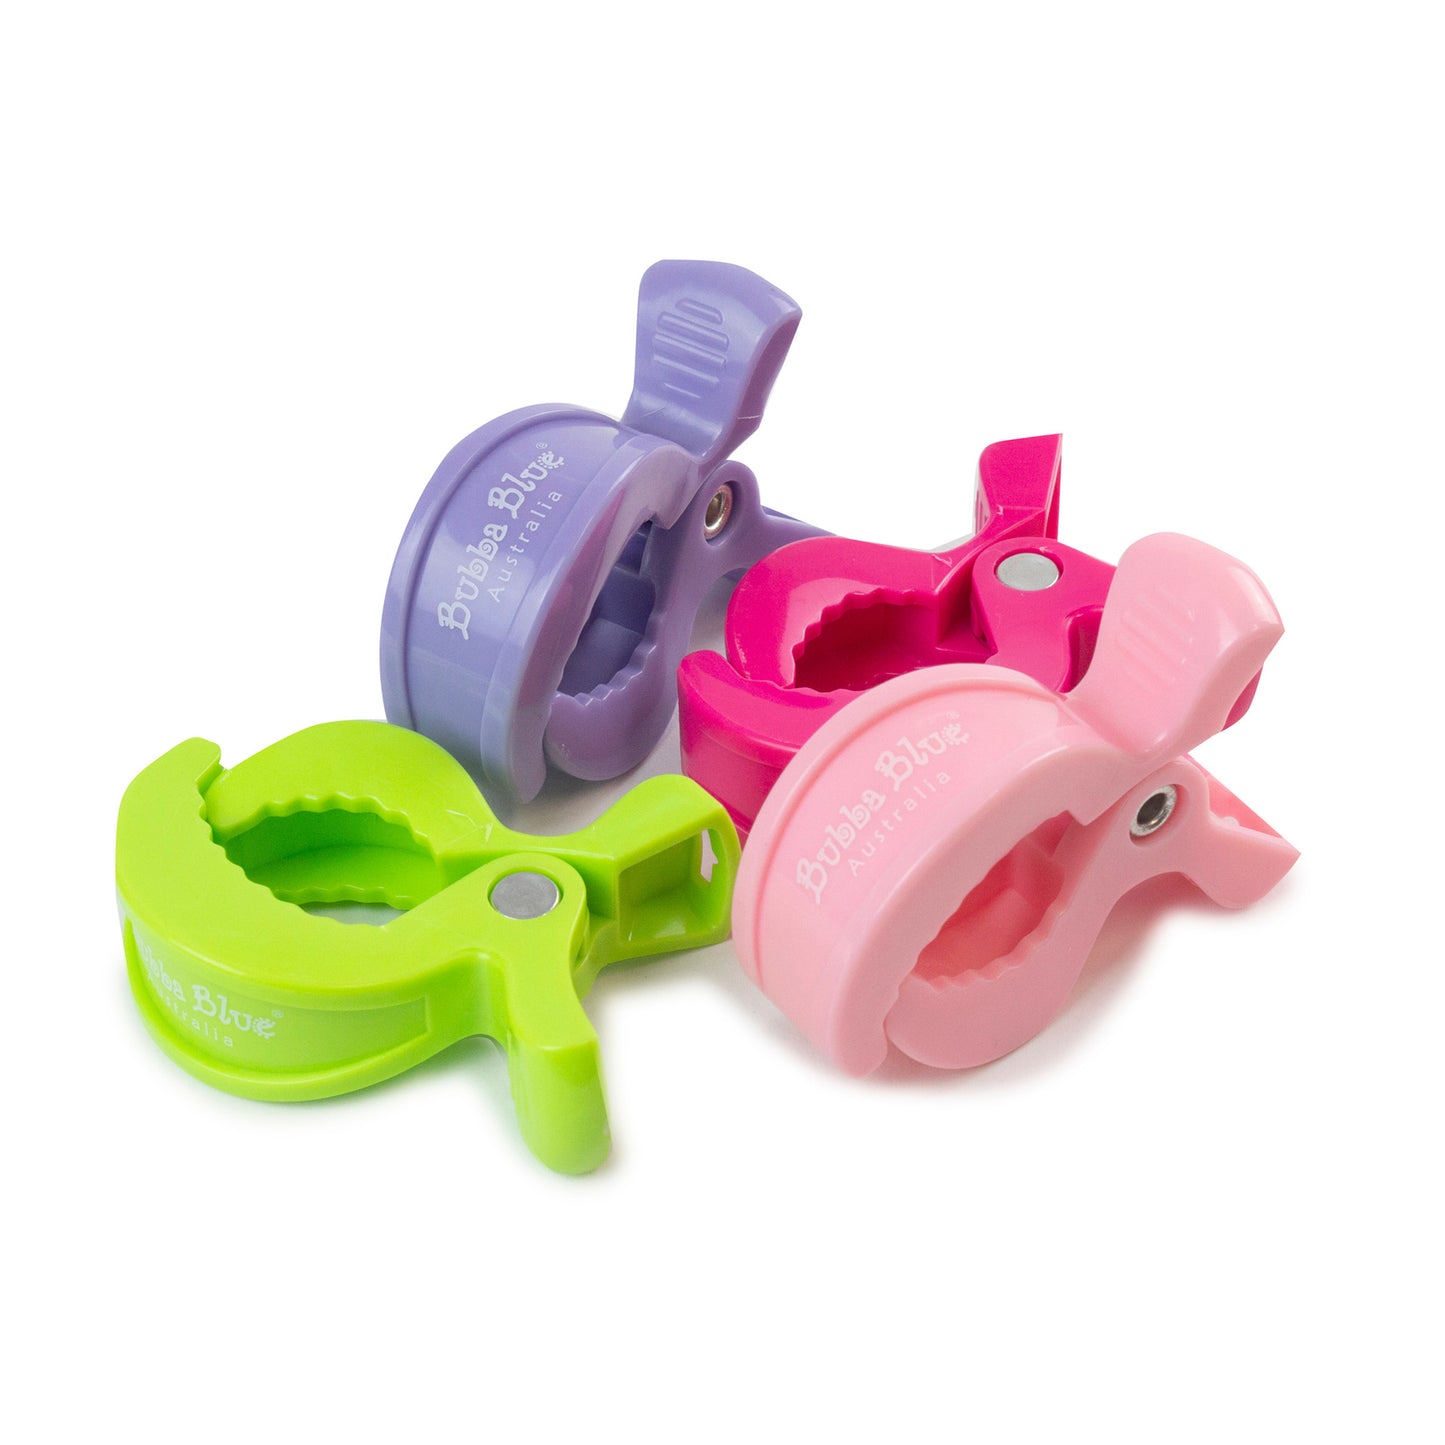 Bubba Blue | 4 Pack Pram Clips - Girl Pack - Nappie Cakes